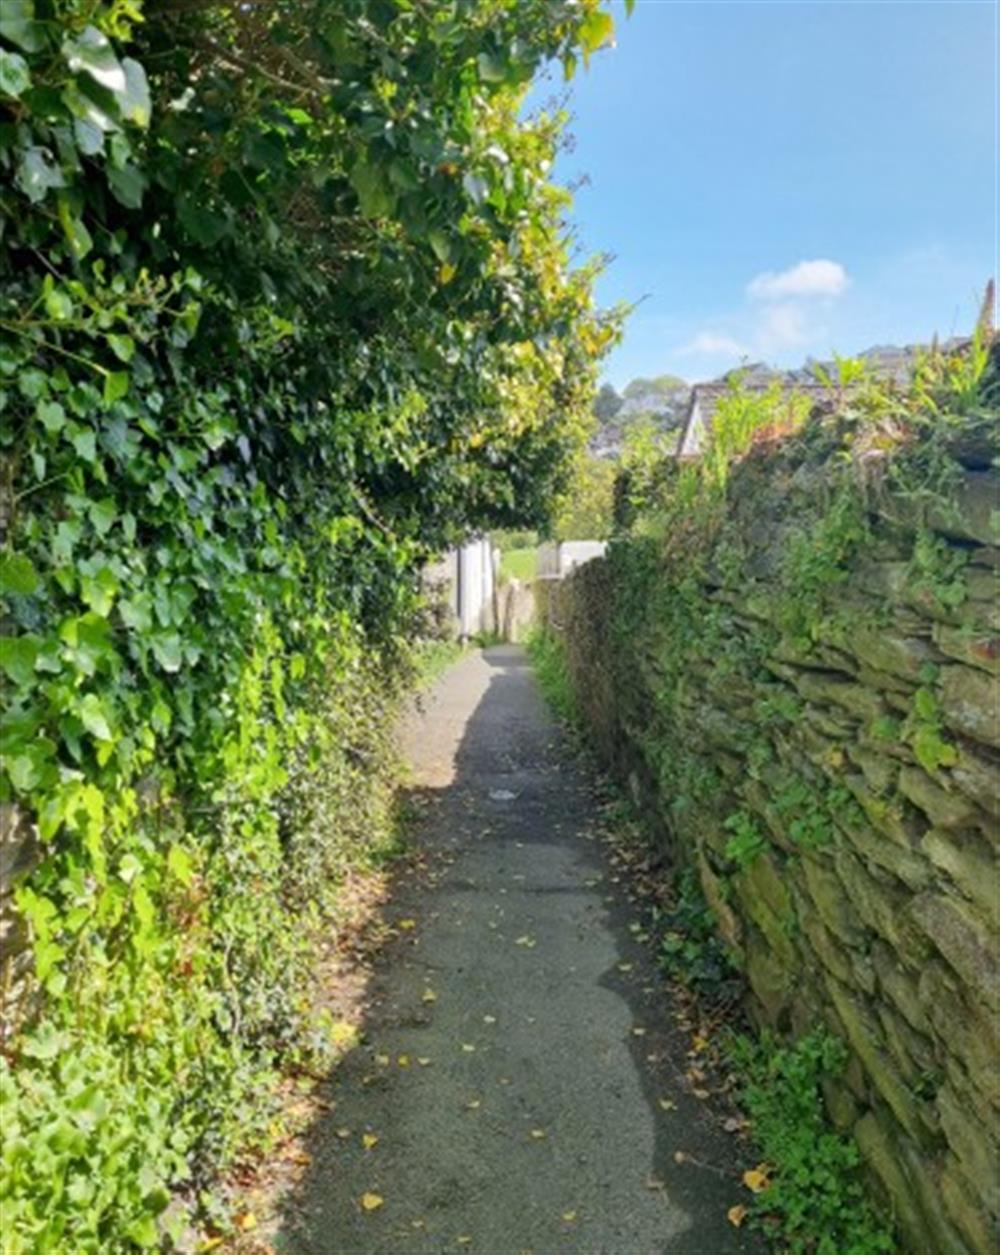 The alleyway and hill leading from the closest public long stay car park to the cottage. The cottage is located off an alleyway which leads down to a park in one direction and the high street in the other direction.